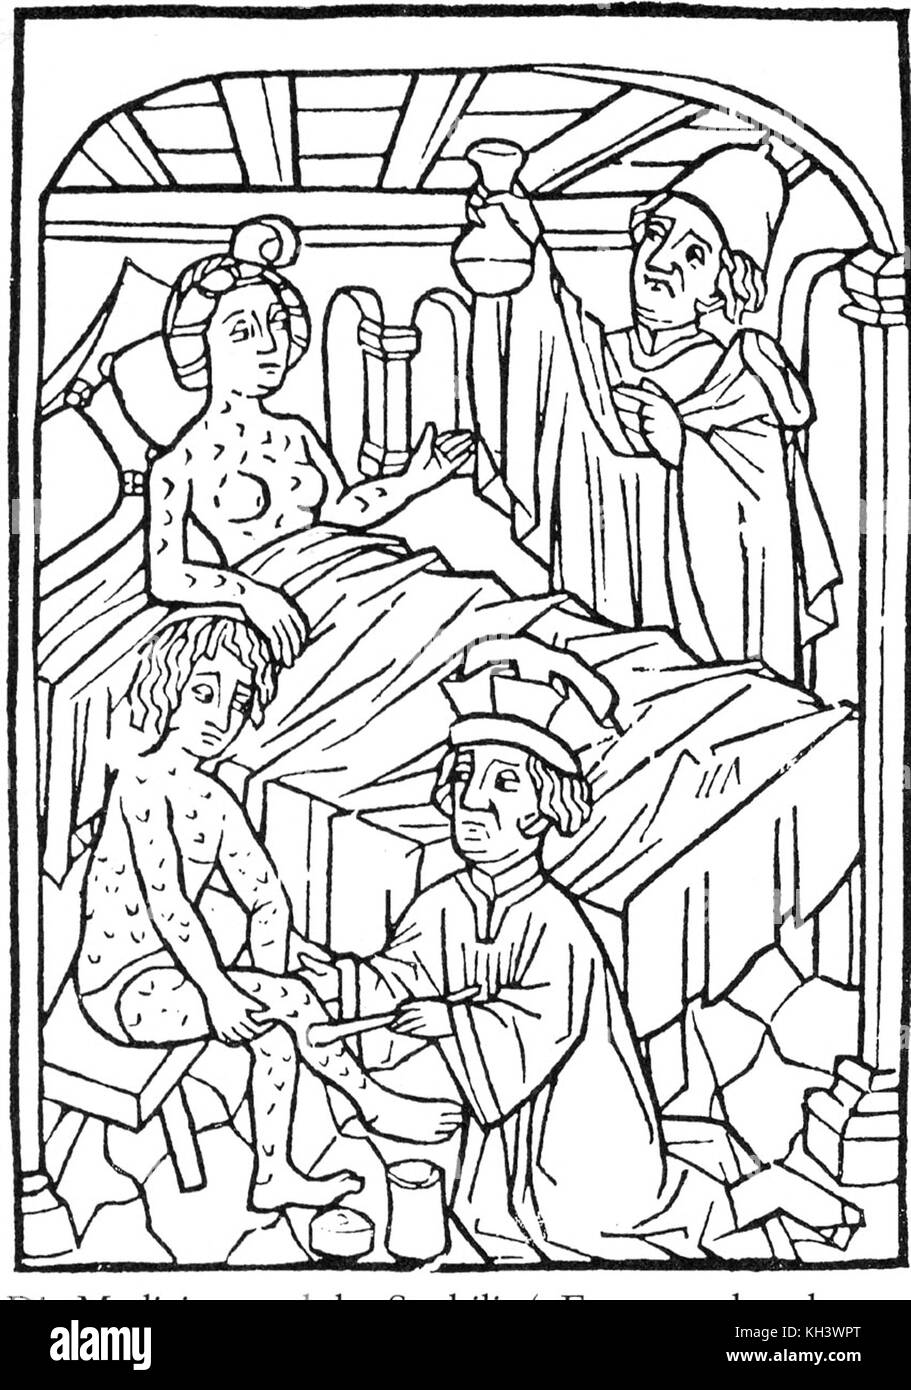 Syphilis. An early medical illustration of people with syphilis, Vienna, 1498 Stock Photo